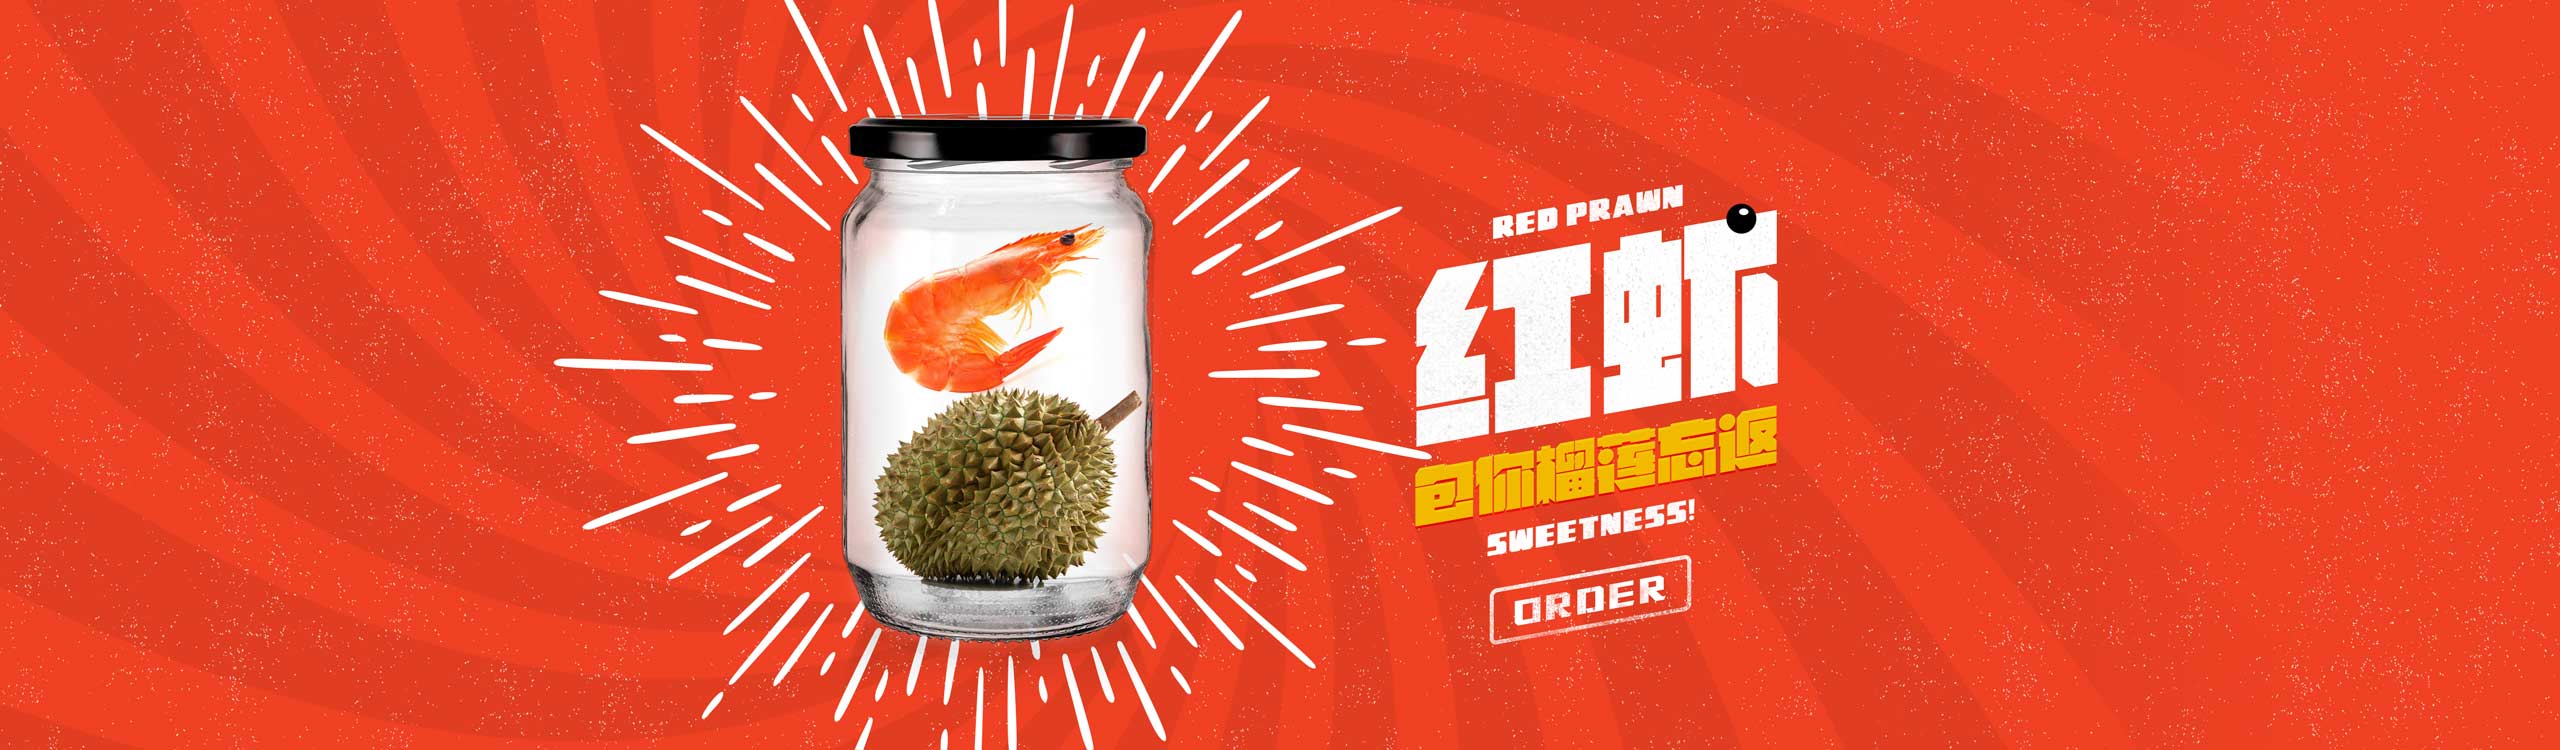 Durian Delivery for Red Prawn Durian Set